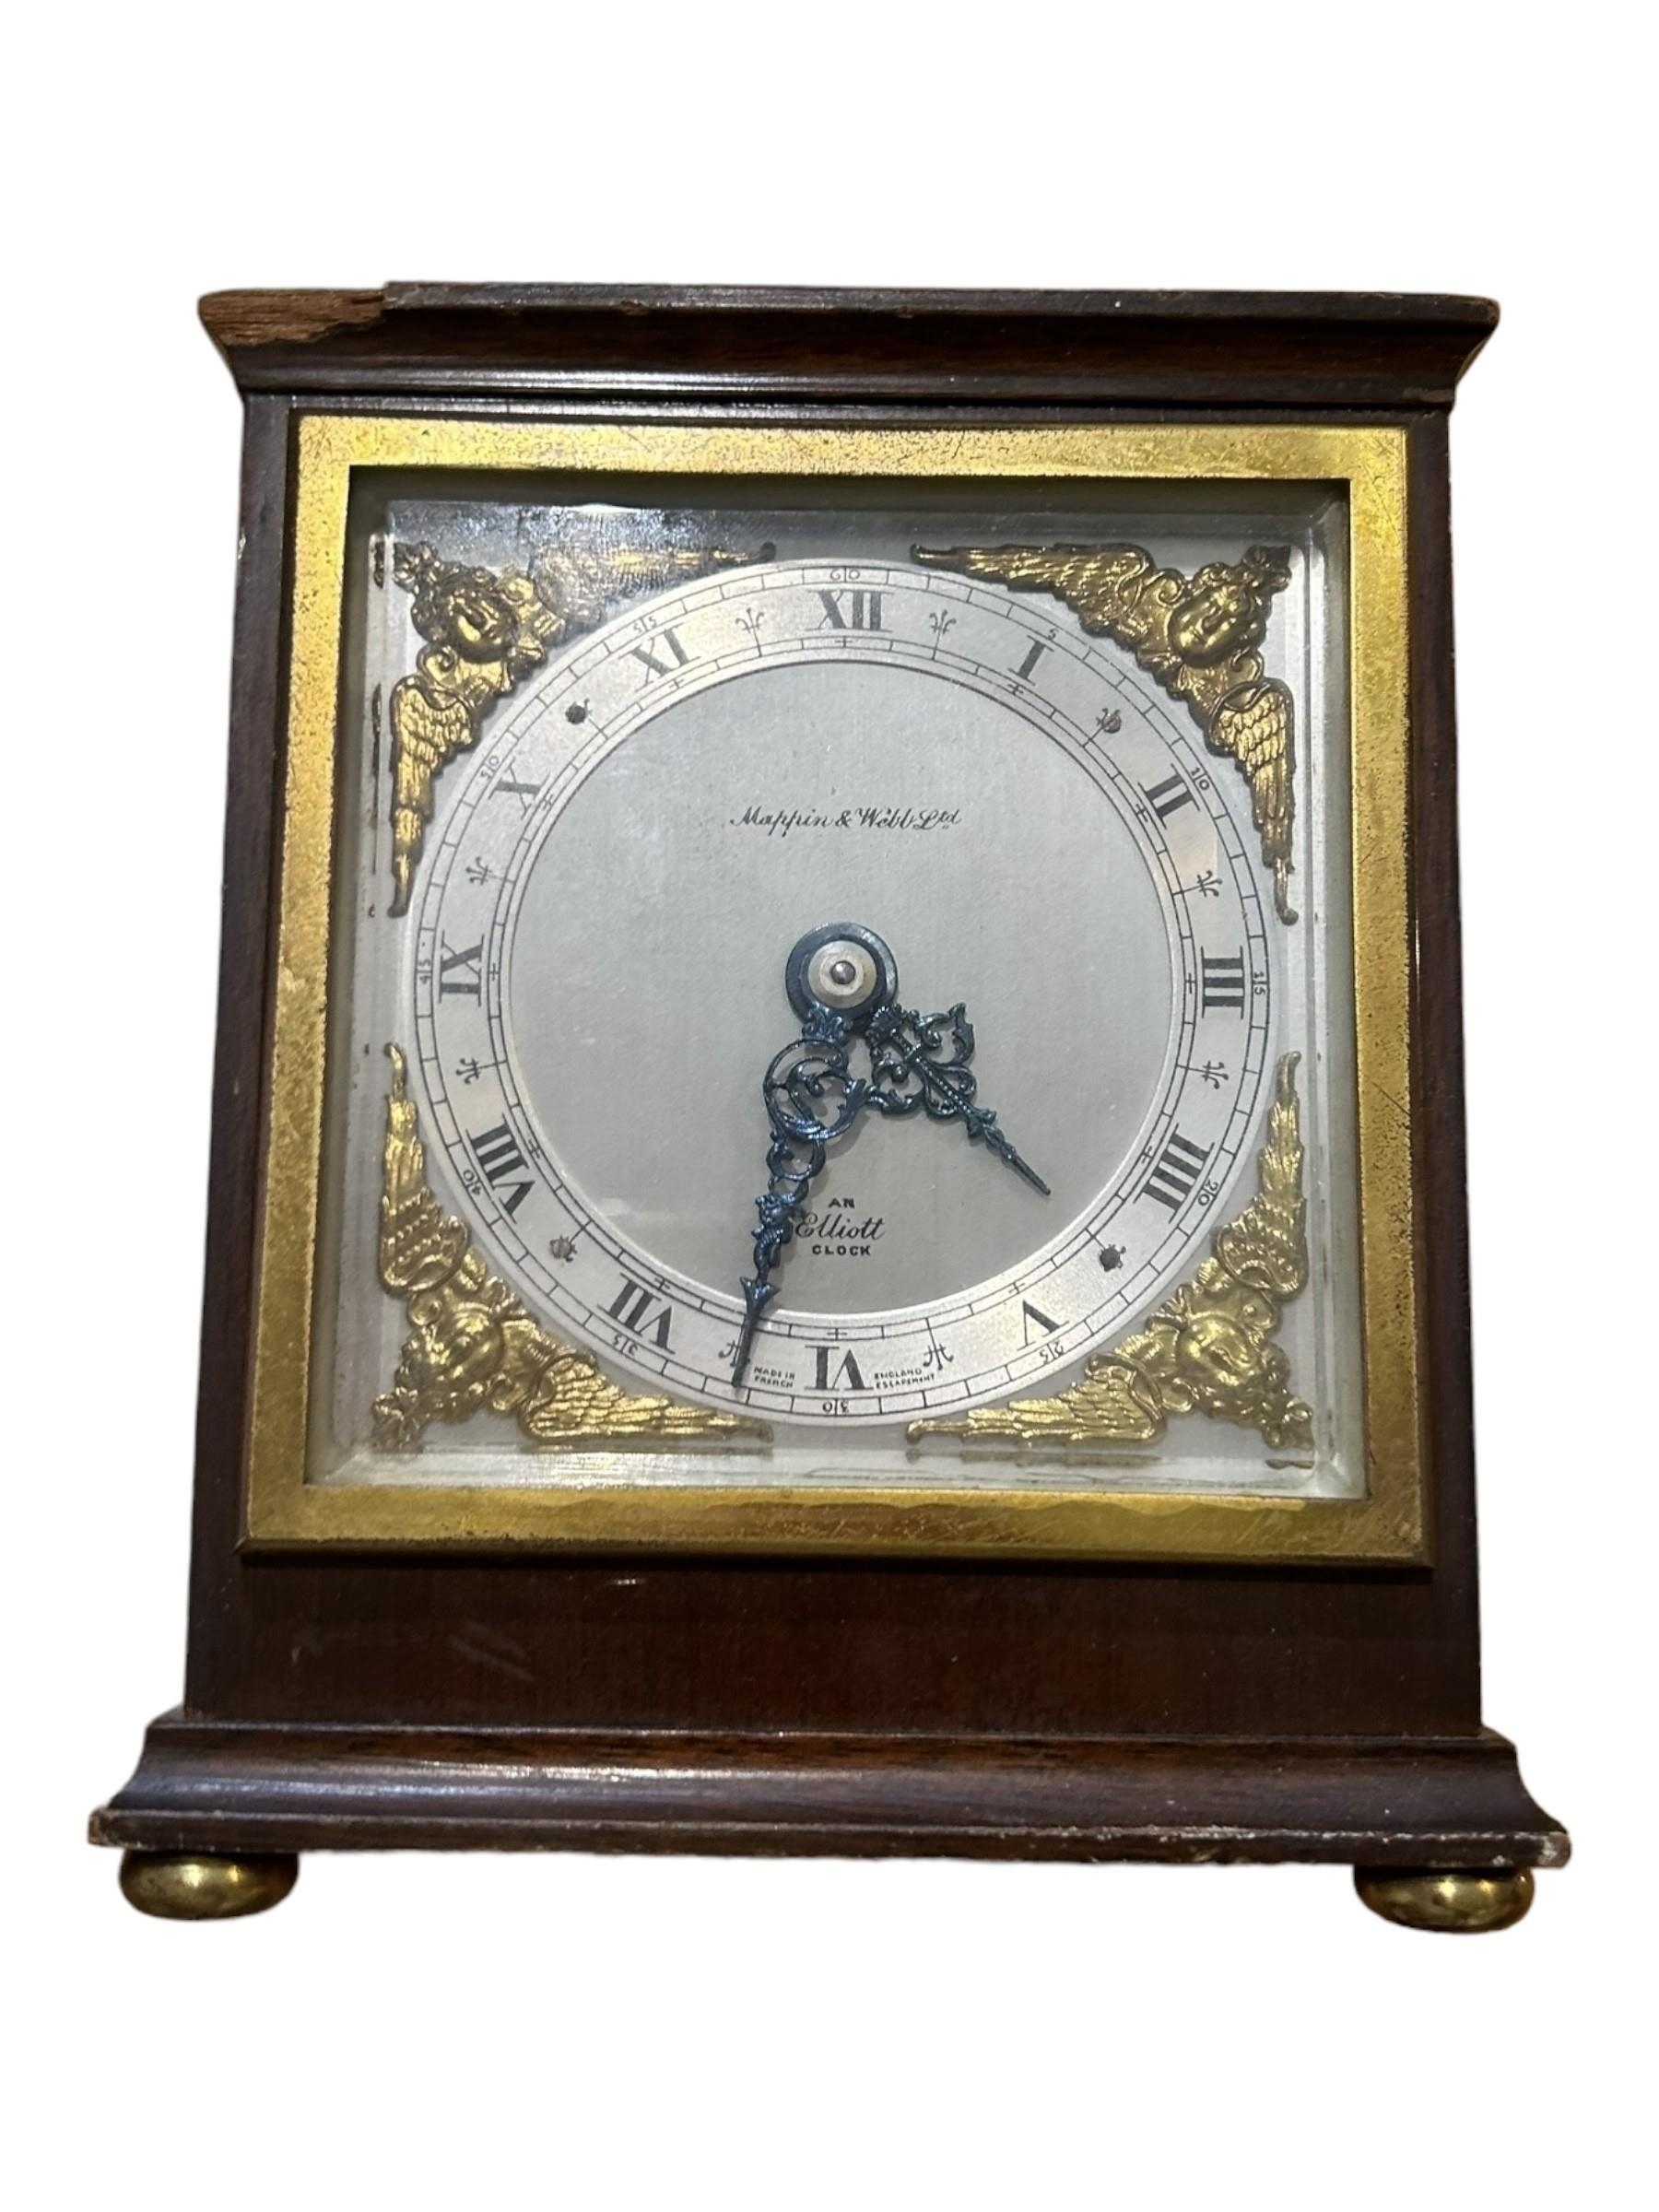 MAPPIN & WEBB, 20TH CENTURY MANTEL/DESK CLOCK Together with a 20th Century clock dial, mechanism, - Image 3 of 3